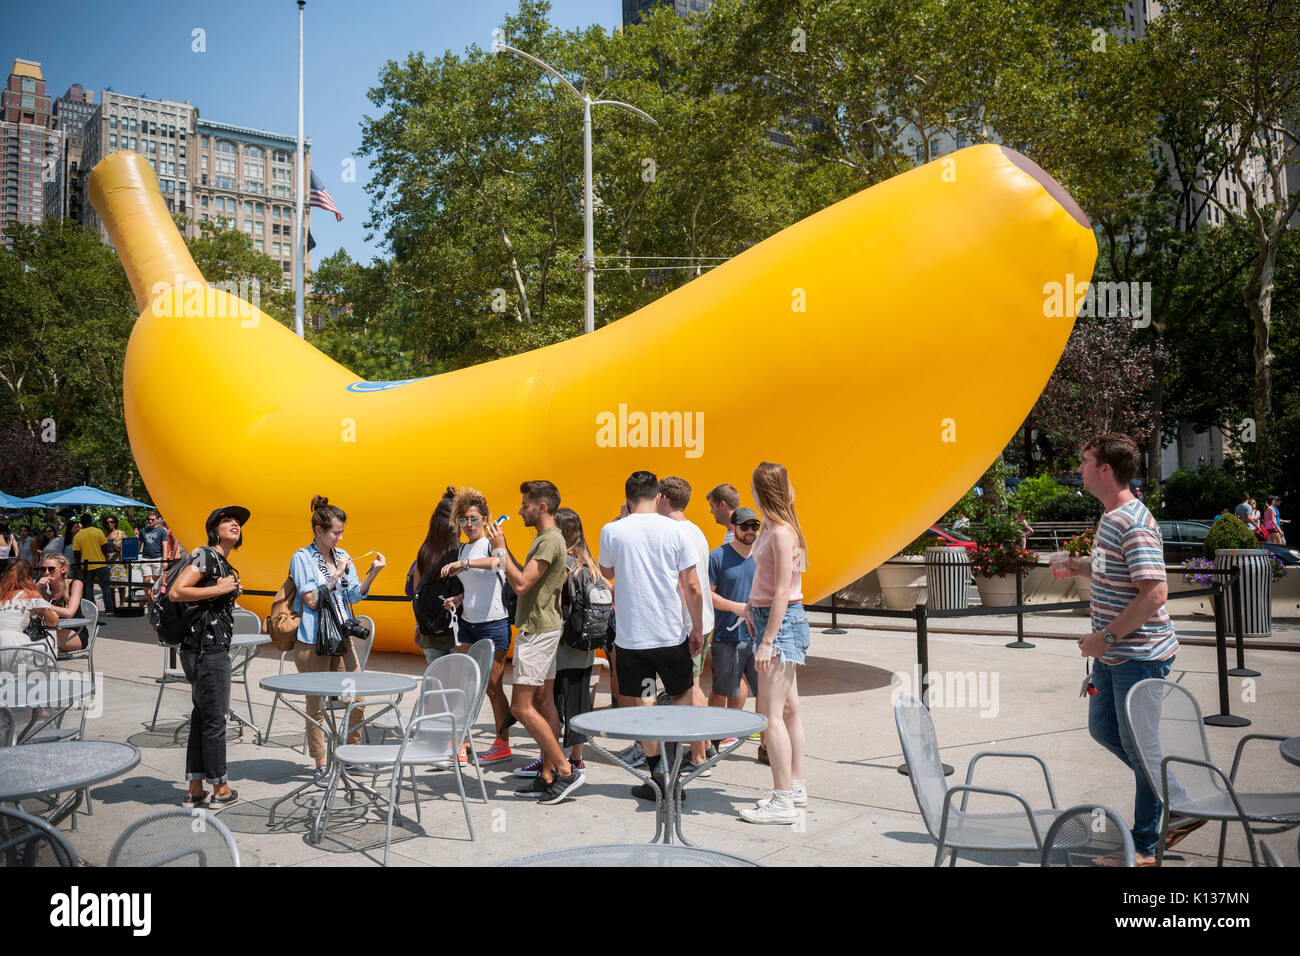 A giant inflatable banana stands in Flatiron Plaza in New York on Sunday, August 20, 2017 as part of the Chiquita 'Banana Sun' branding event. Chiquita has claimed the banana shaped sliver of the sun caused by the eclipse and re-named it the 'Banana Sun', also claiming that they are responsible for the eclipse. The tongue-in-cheek branding event also featured free eclipse watching glasses to passer-by. (© Richard B. Levine) Stock Photo